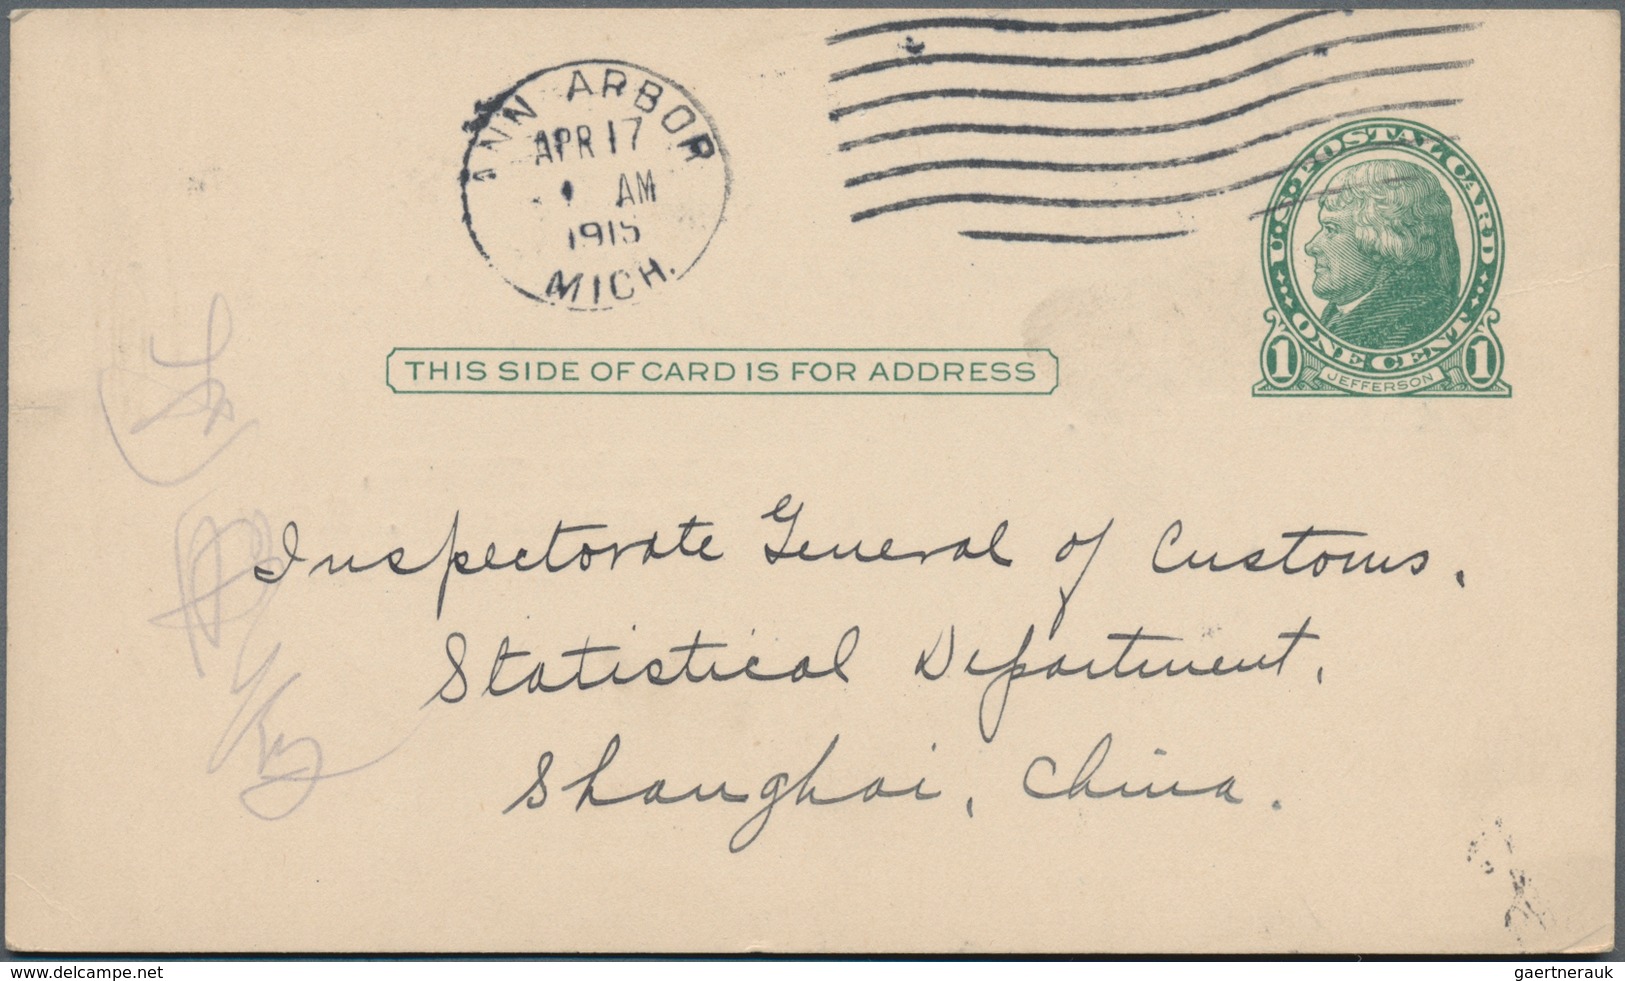 China - Incoming Mail: 1913/16, to IMC statistical department Shanghai, used stationery cards from U